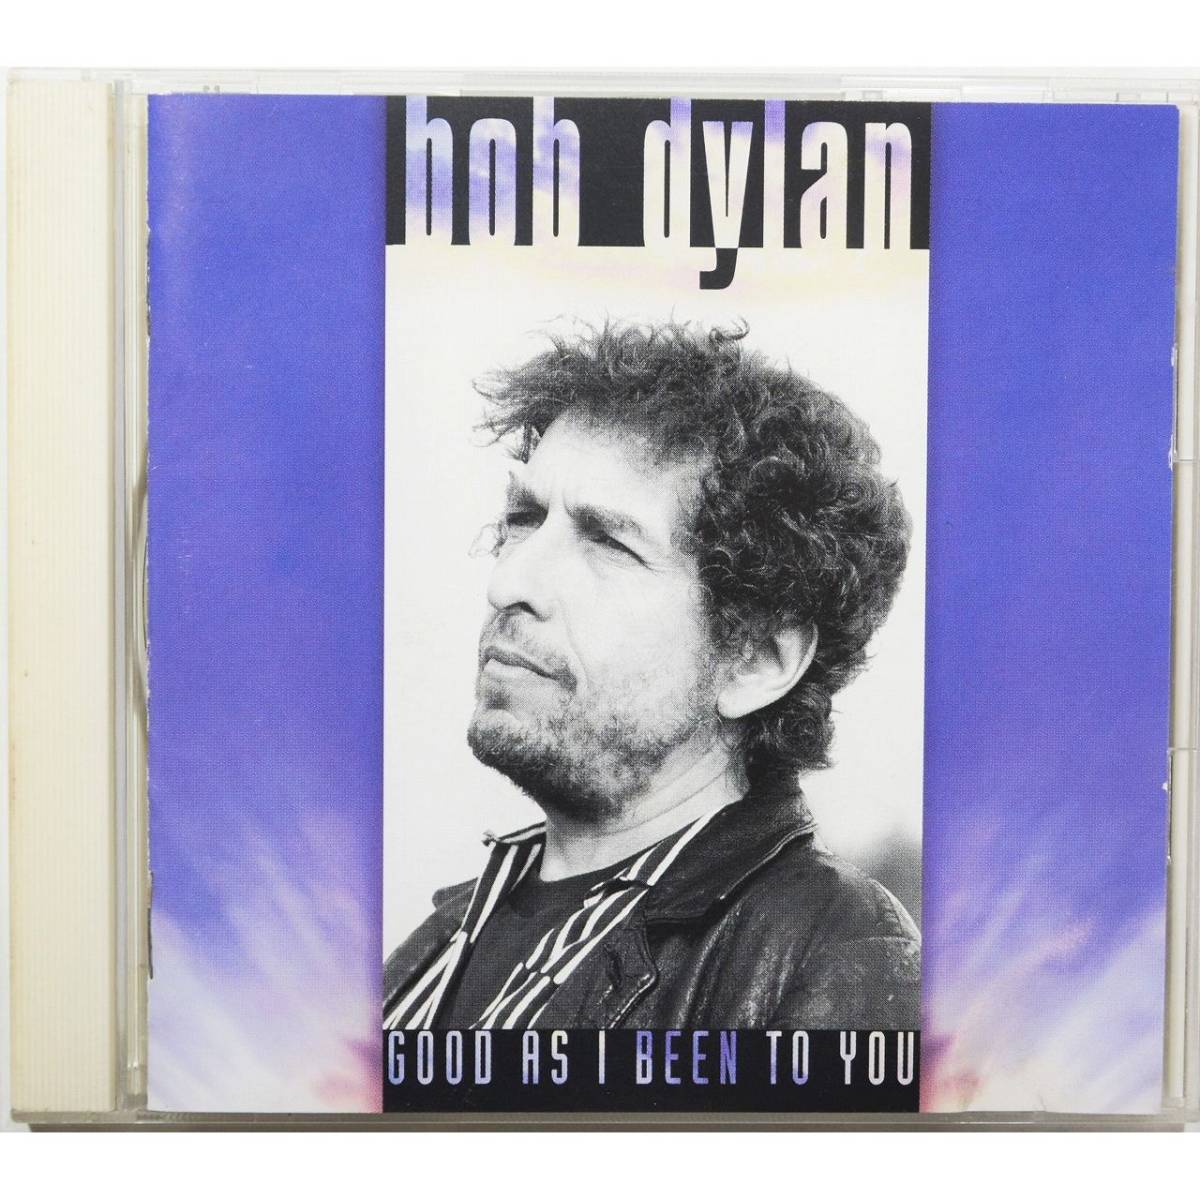 Bob Dylan / Good As I Been to You ◇ ボブ・ディラン / グッド・アズ・アイ・ビーン・トゥ・ユー ◇ 国内盤 ◇0632_画像1